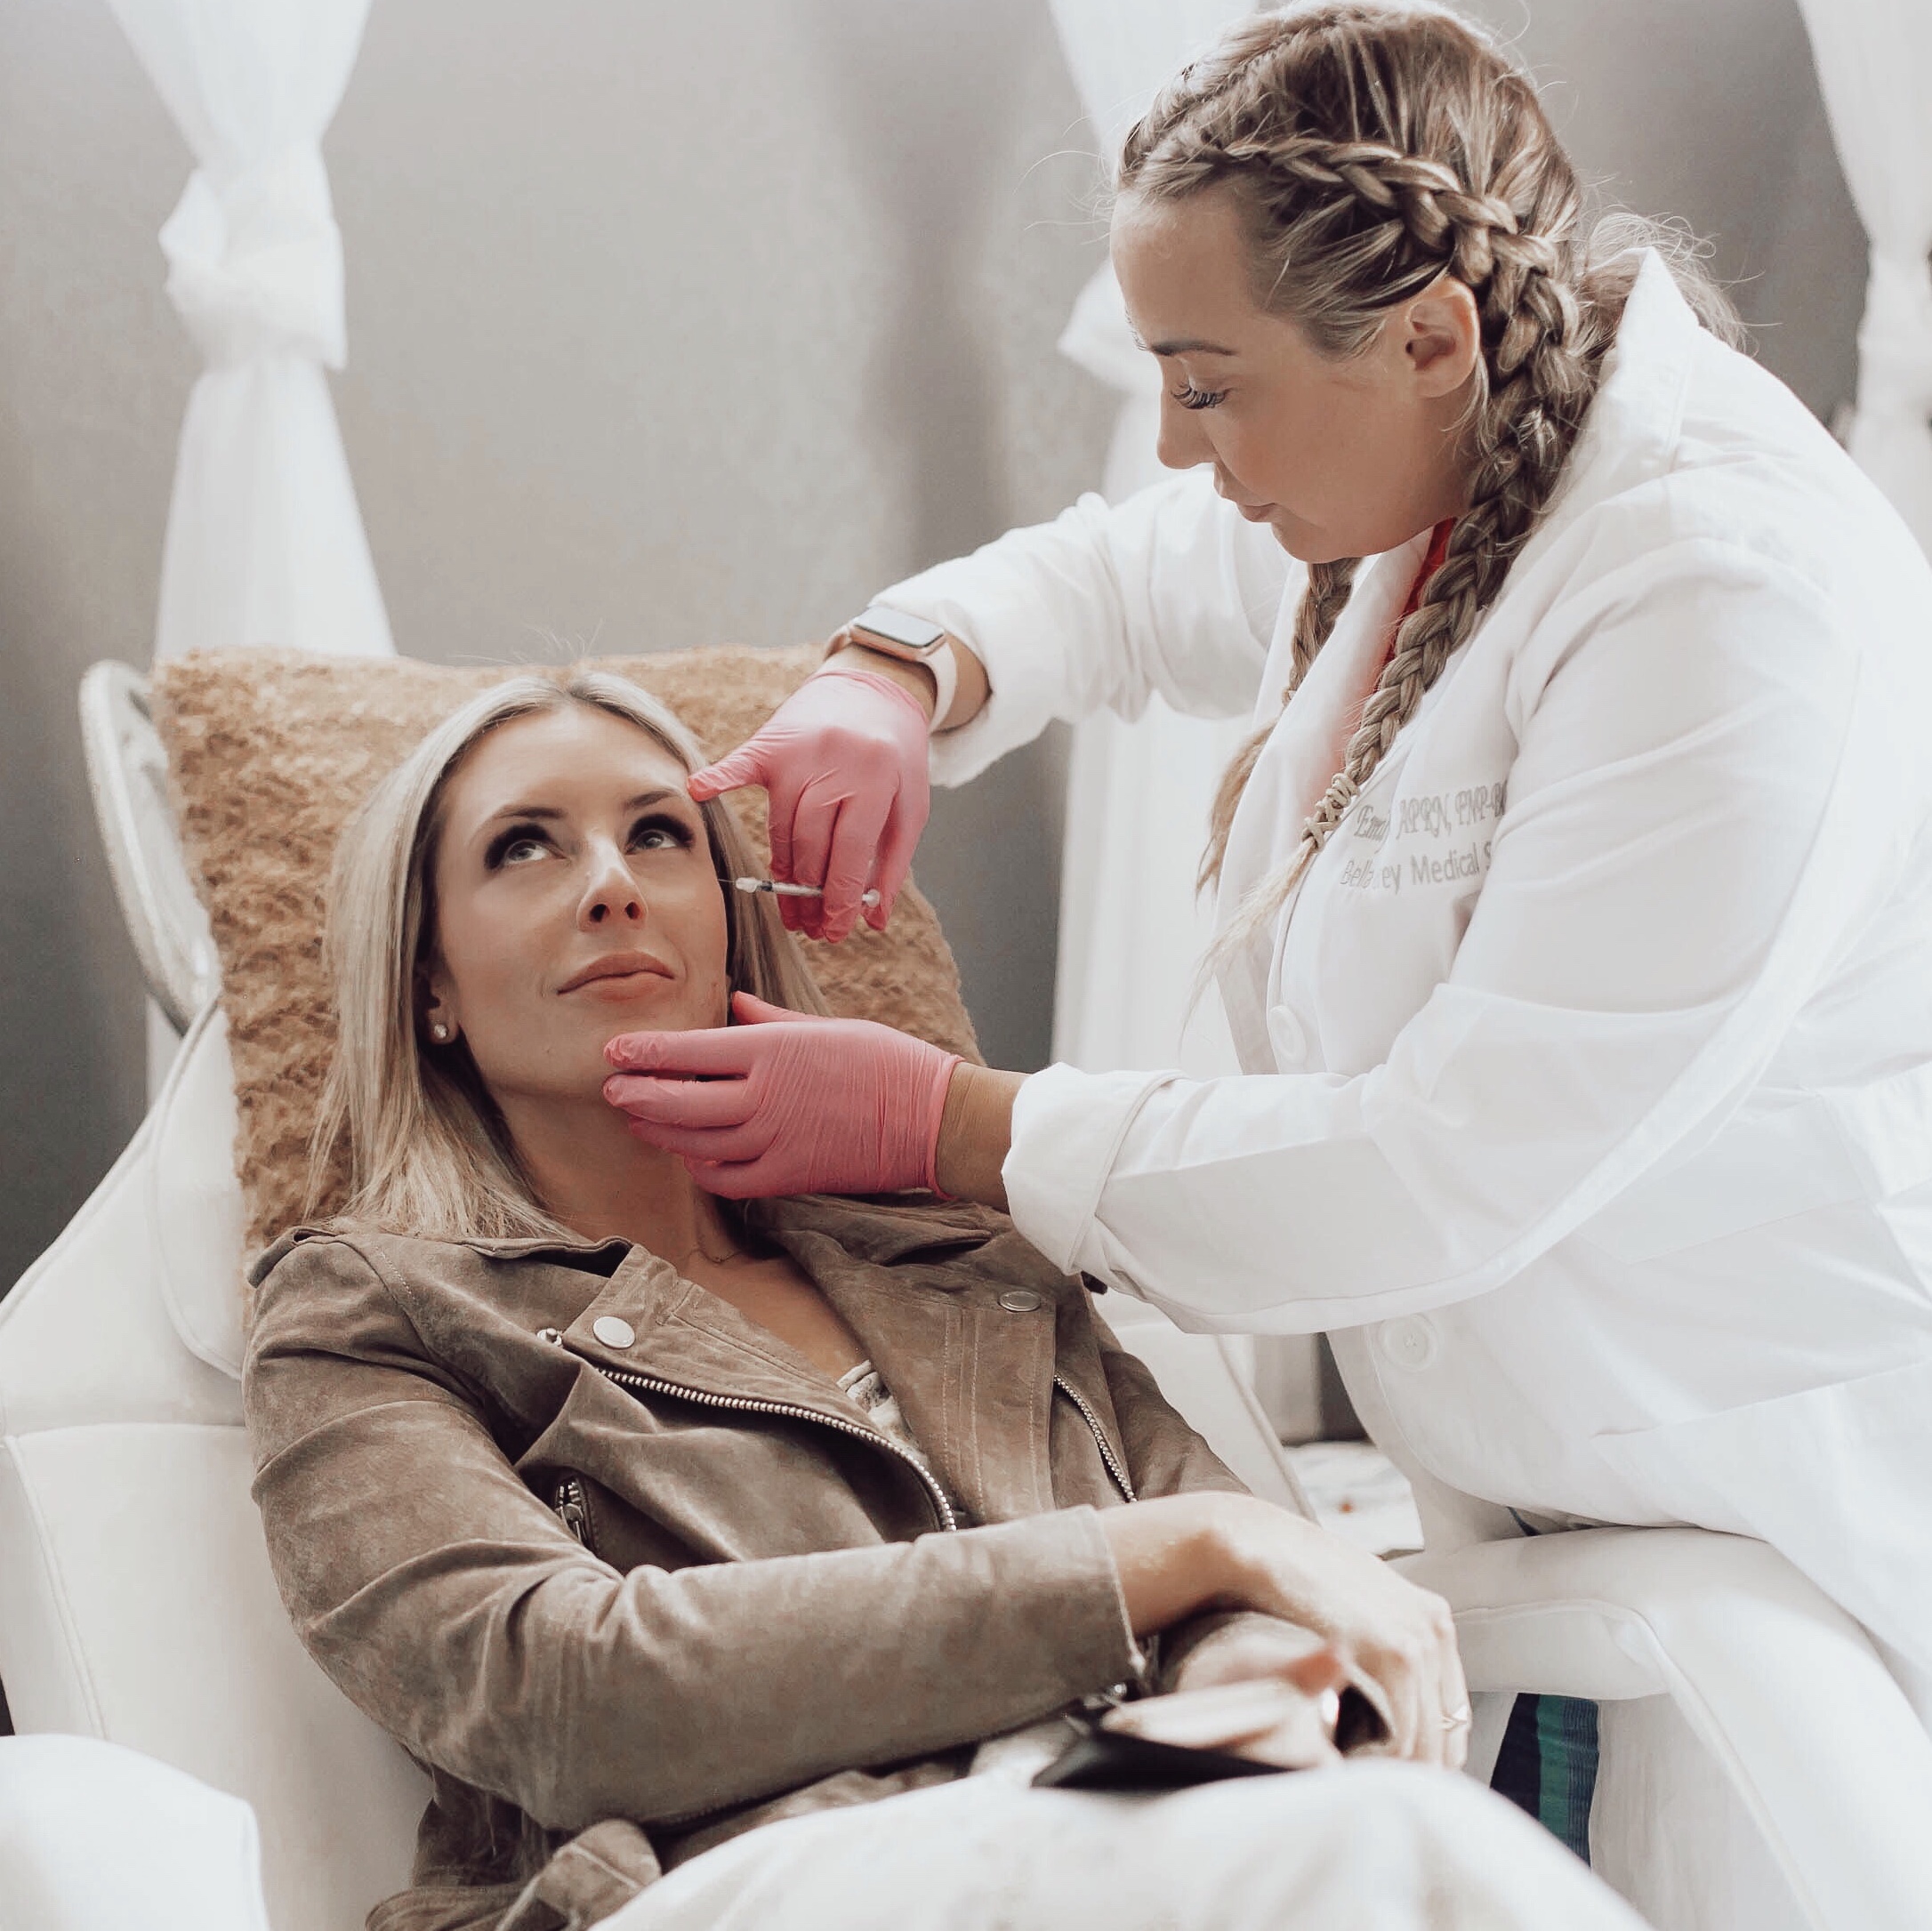 Reno, Nevada Blogger, Emily Farren Wieczorek of Two Peas in a Prada shares her experience with Botox and fillers at Bella Grey Med Spa